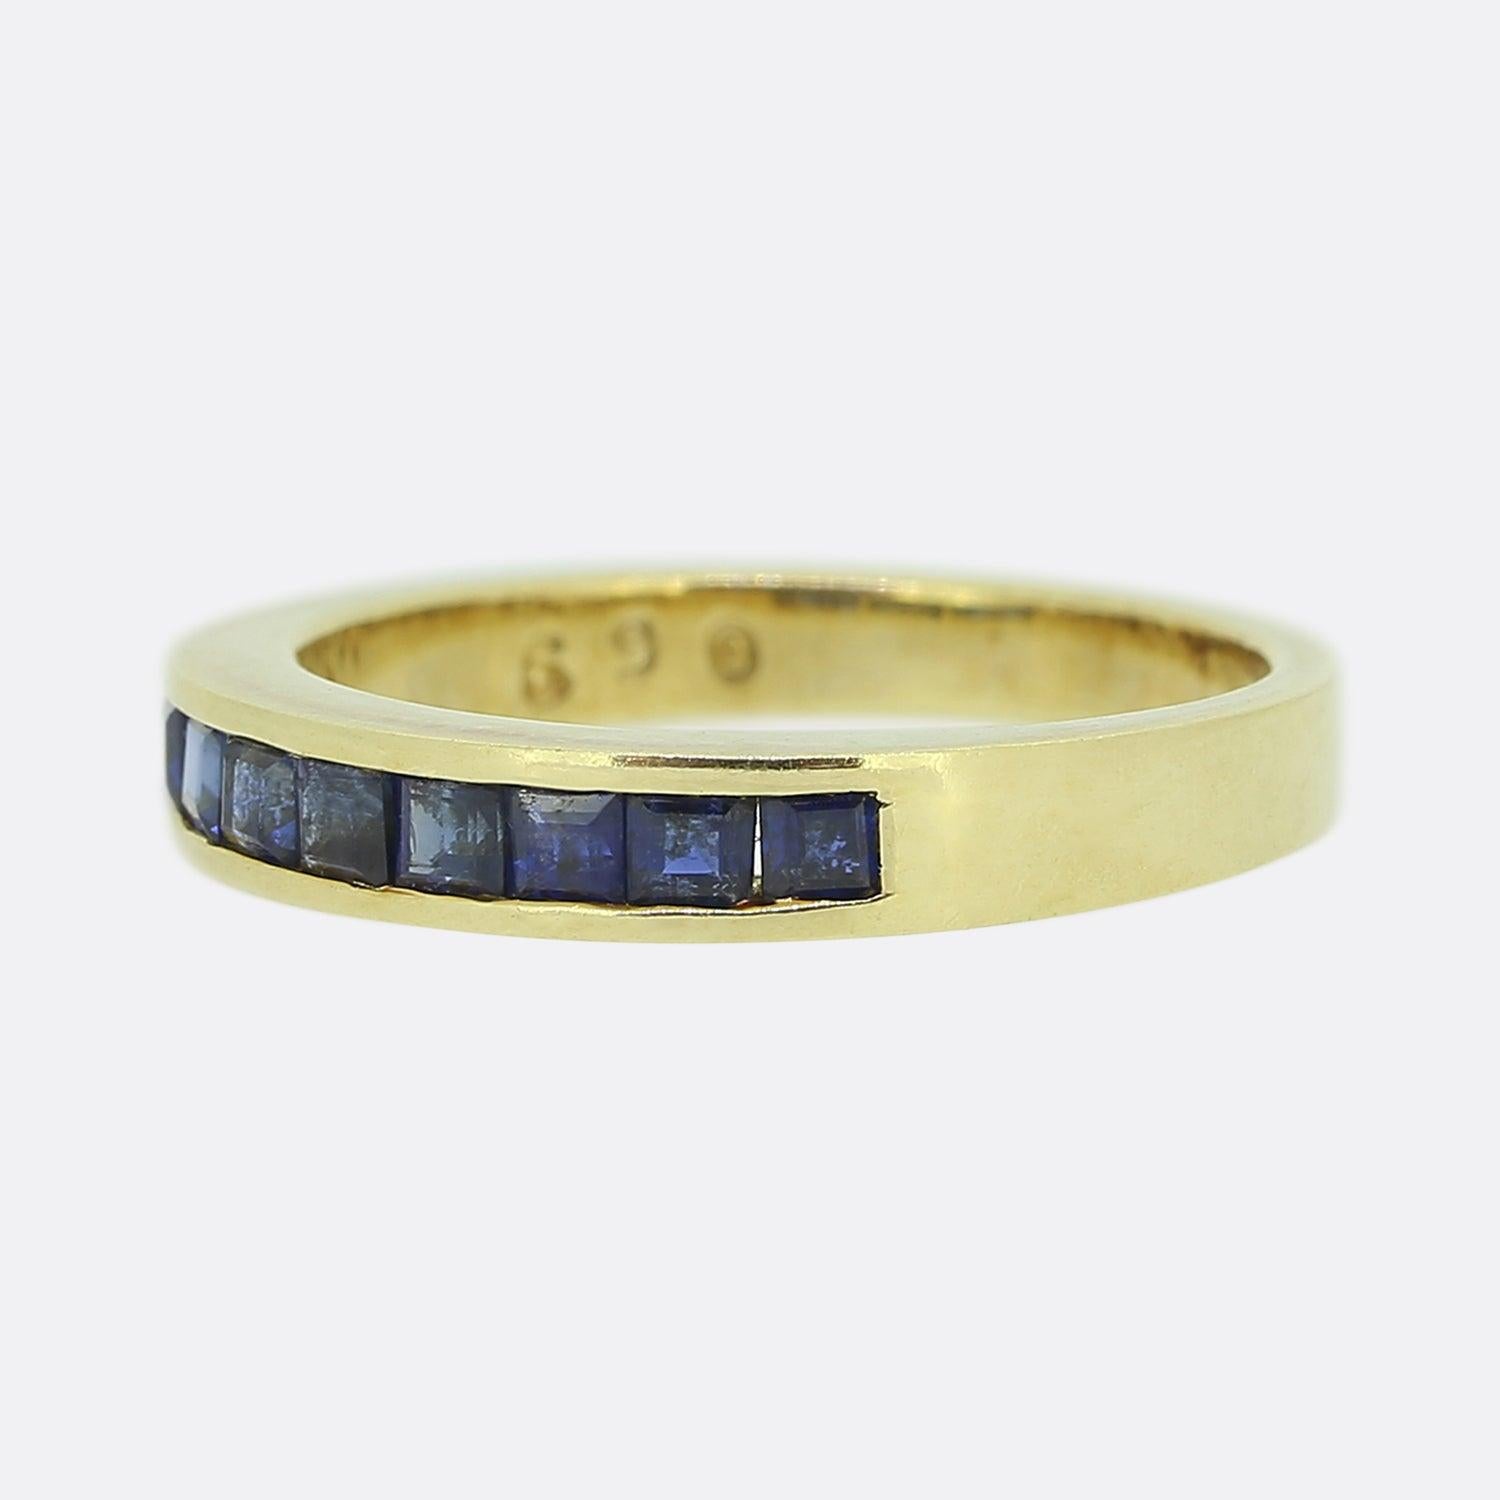 Here we have a classic sapphire band ring. A 14ct yellow gold mount plays host to nine square calibrated sapphires; all of which have been neatly rub-over set in a single line formation and are perfectly matched in terms of their rich dark navy